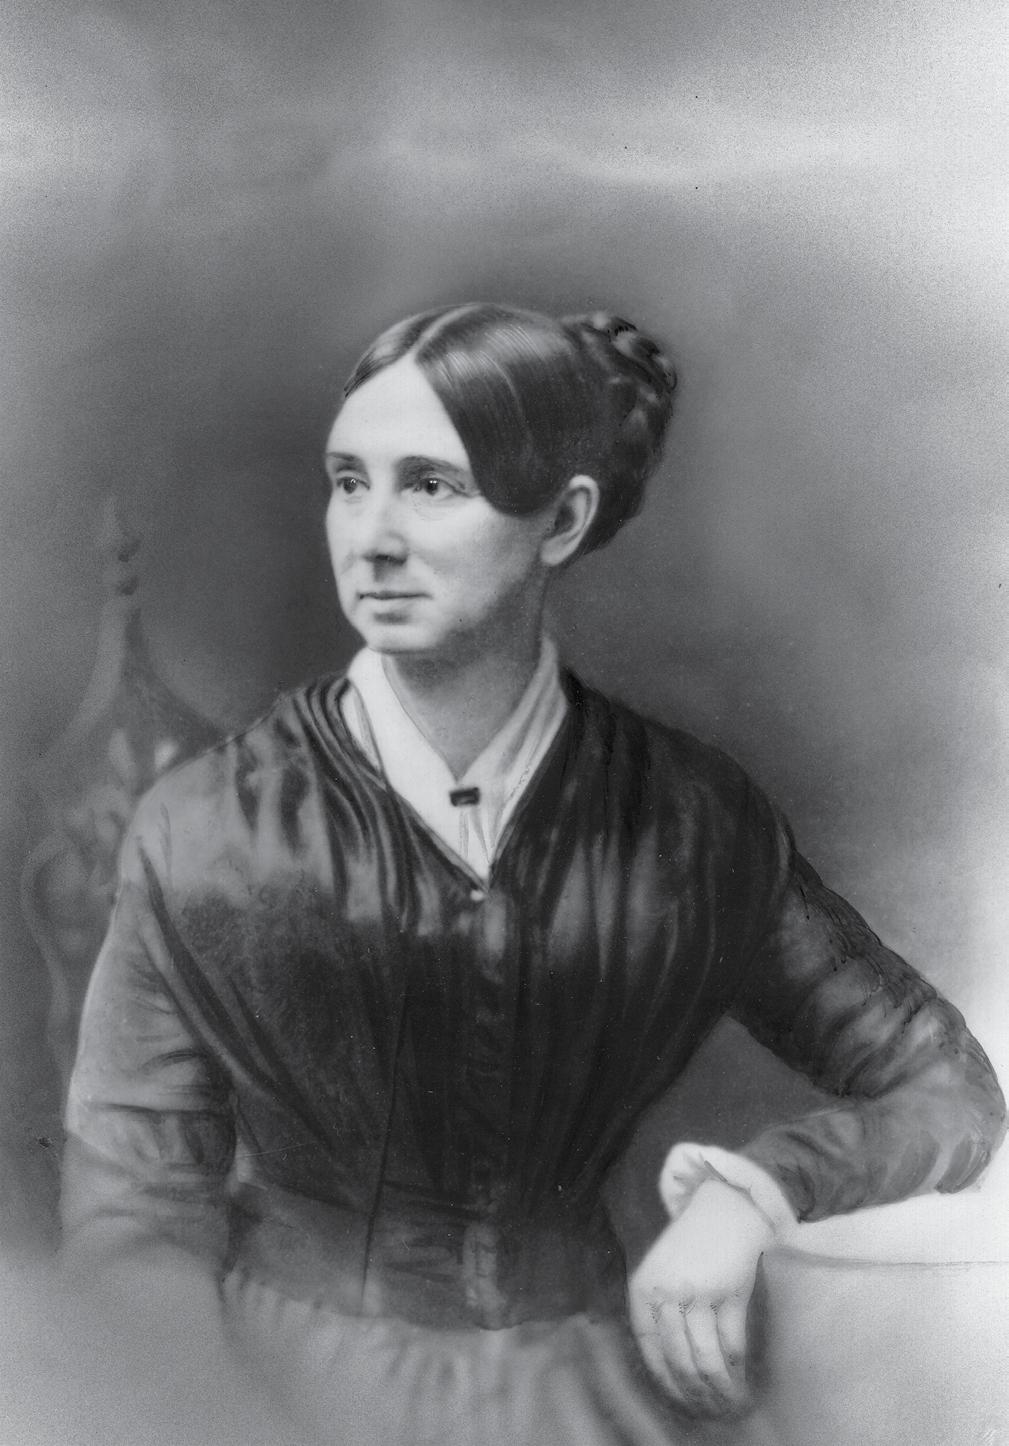 Dorothea Dix worked to improve care for